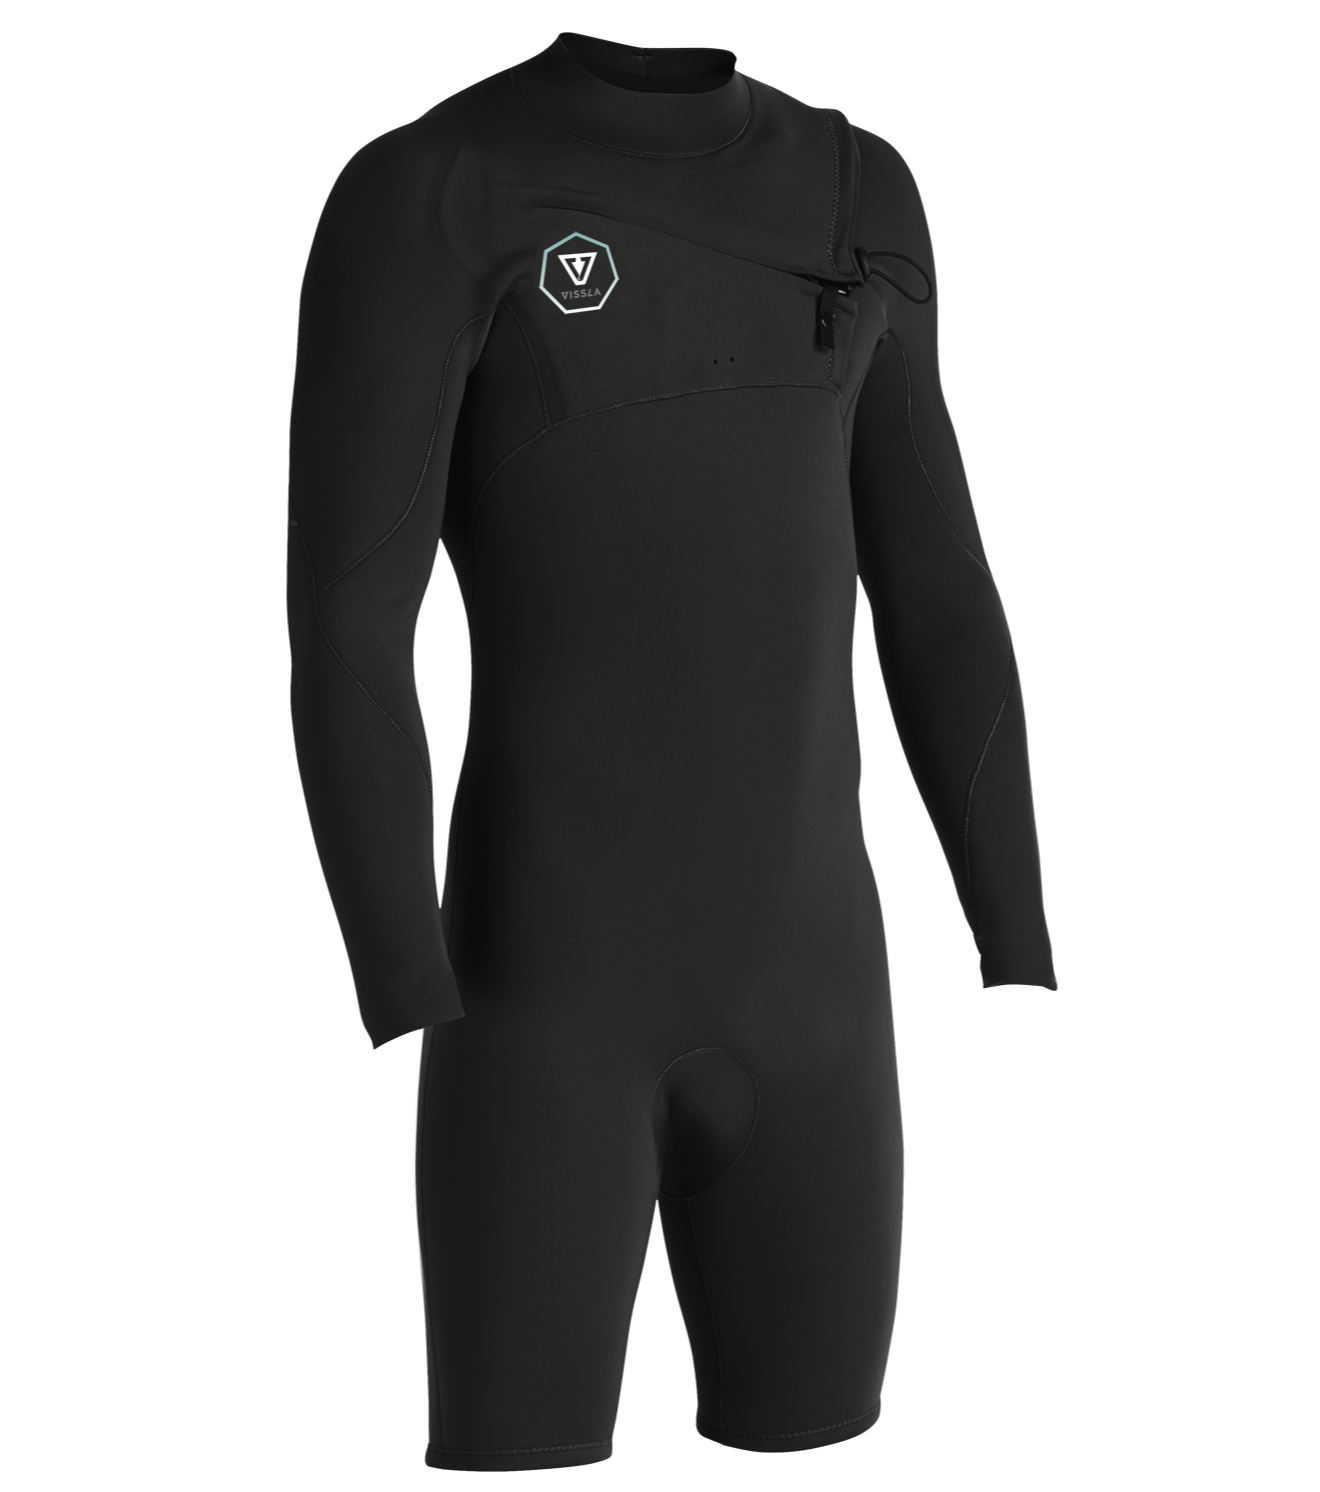 Wetsuit 2/2 for Warmer Days